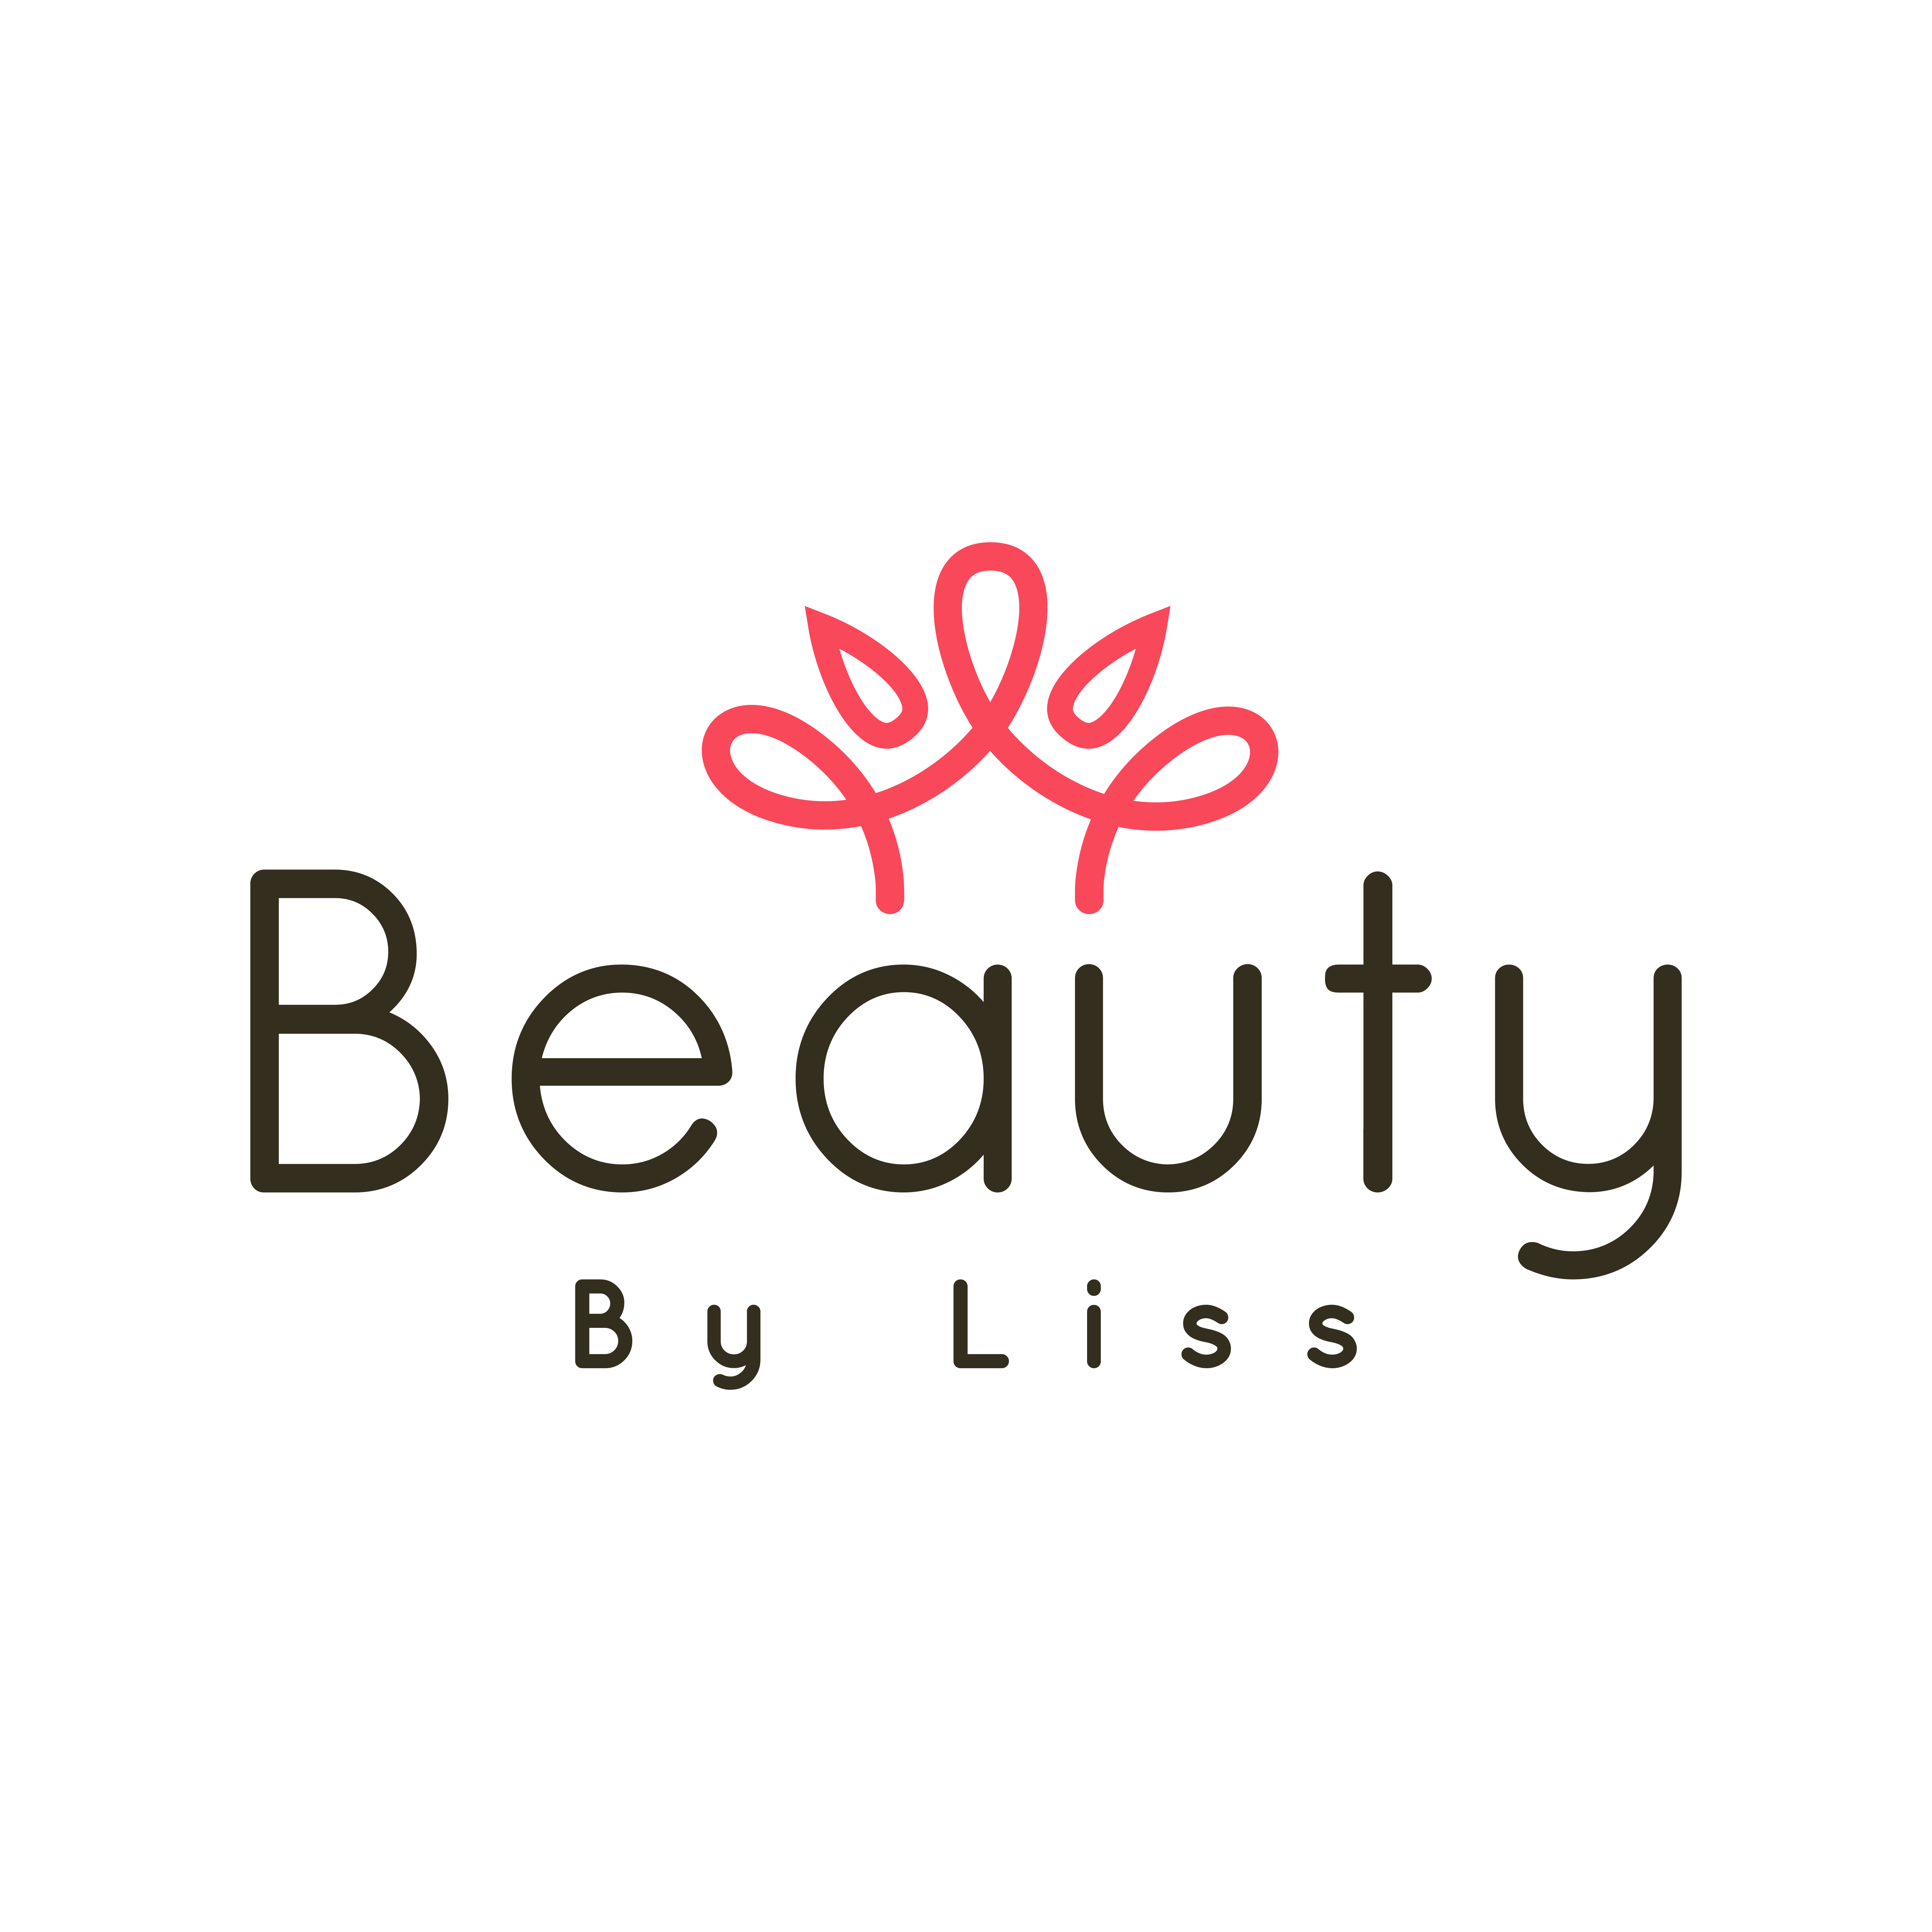 Beauty by Liss